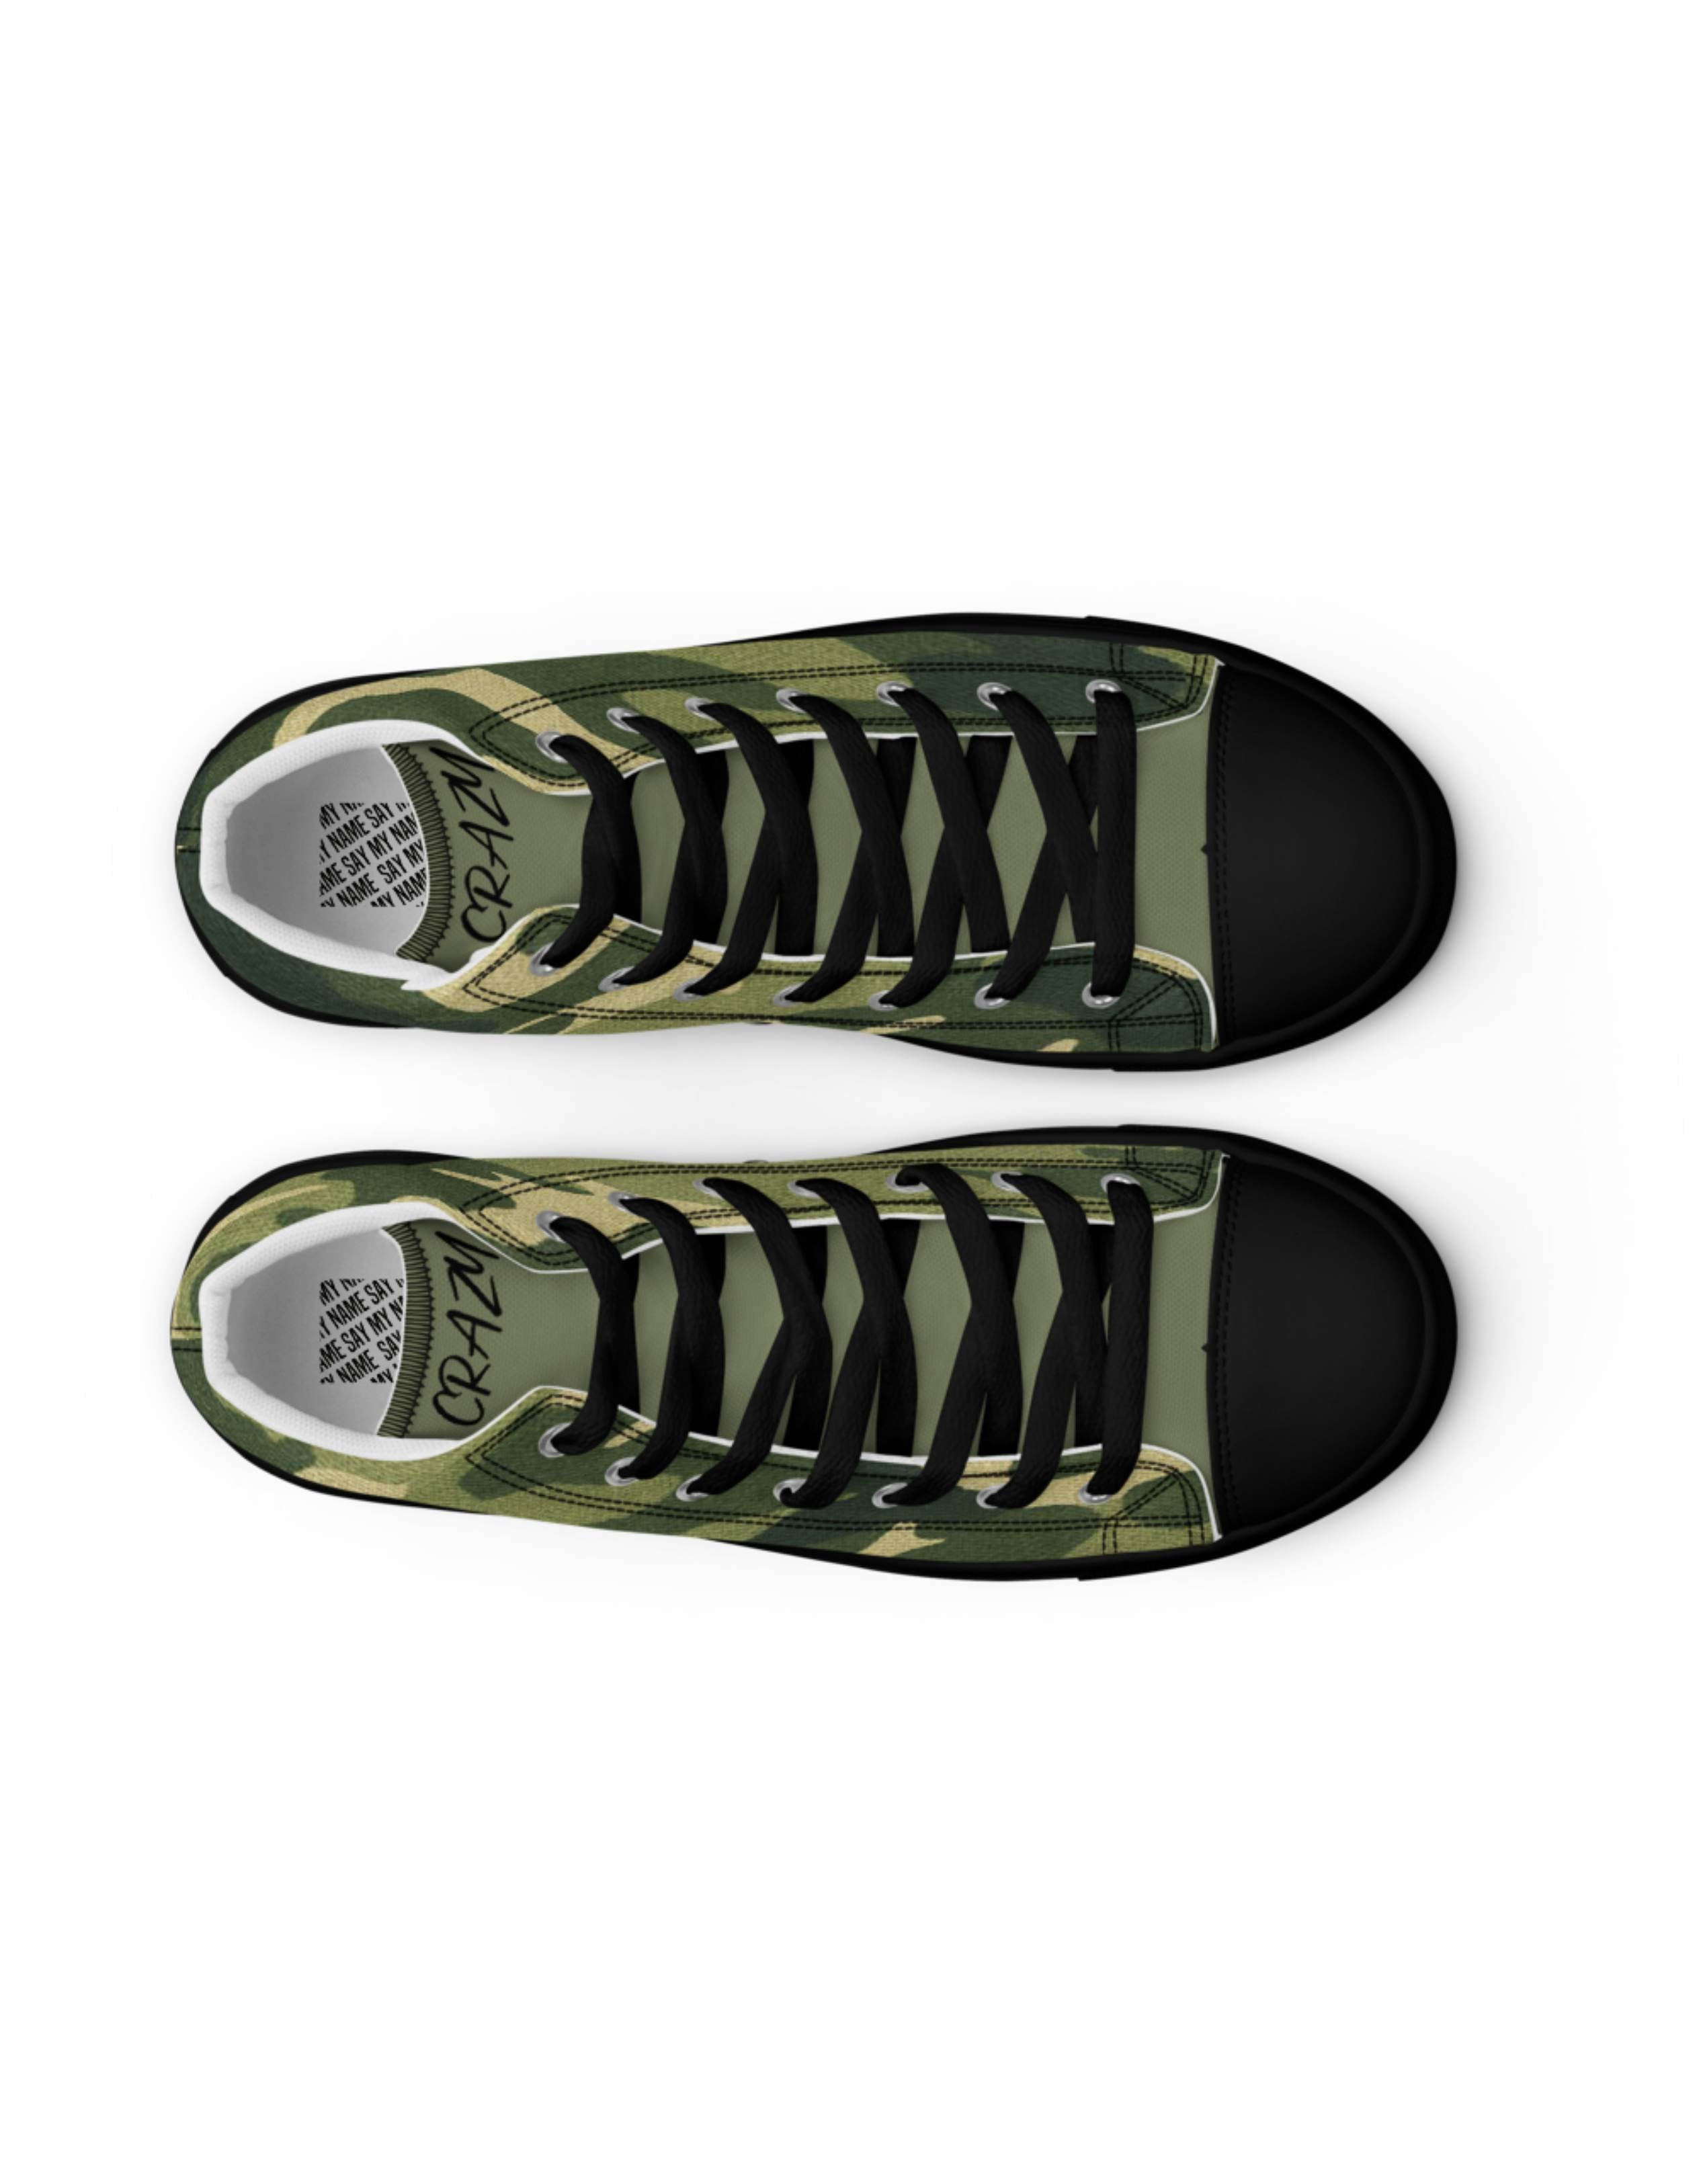 Men's high-top green camouflage canvas sneakers "SAY MY NAME"